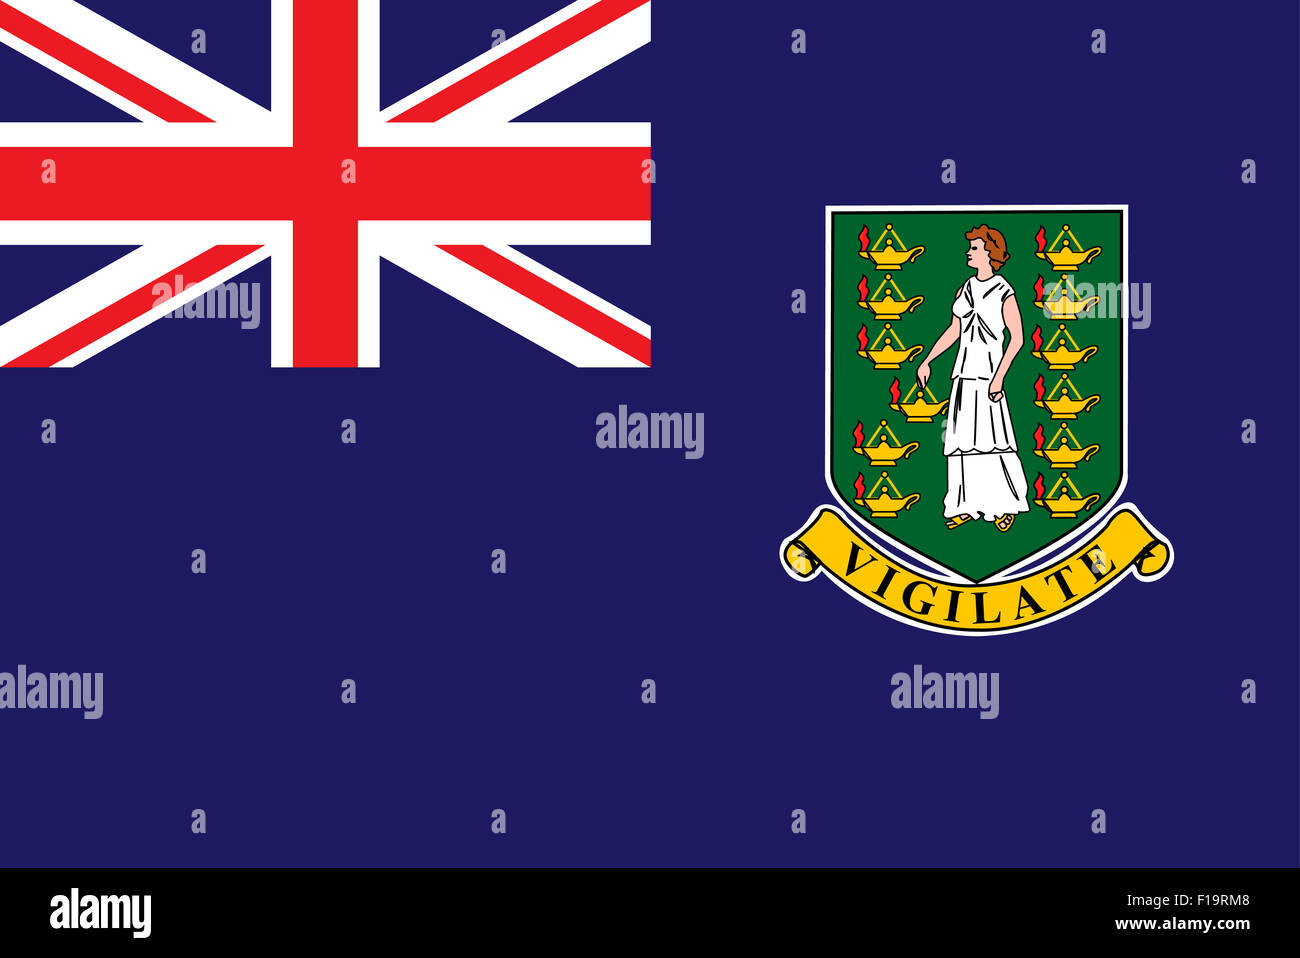 National flag of the British Virgin Islands Stock Photo